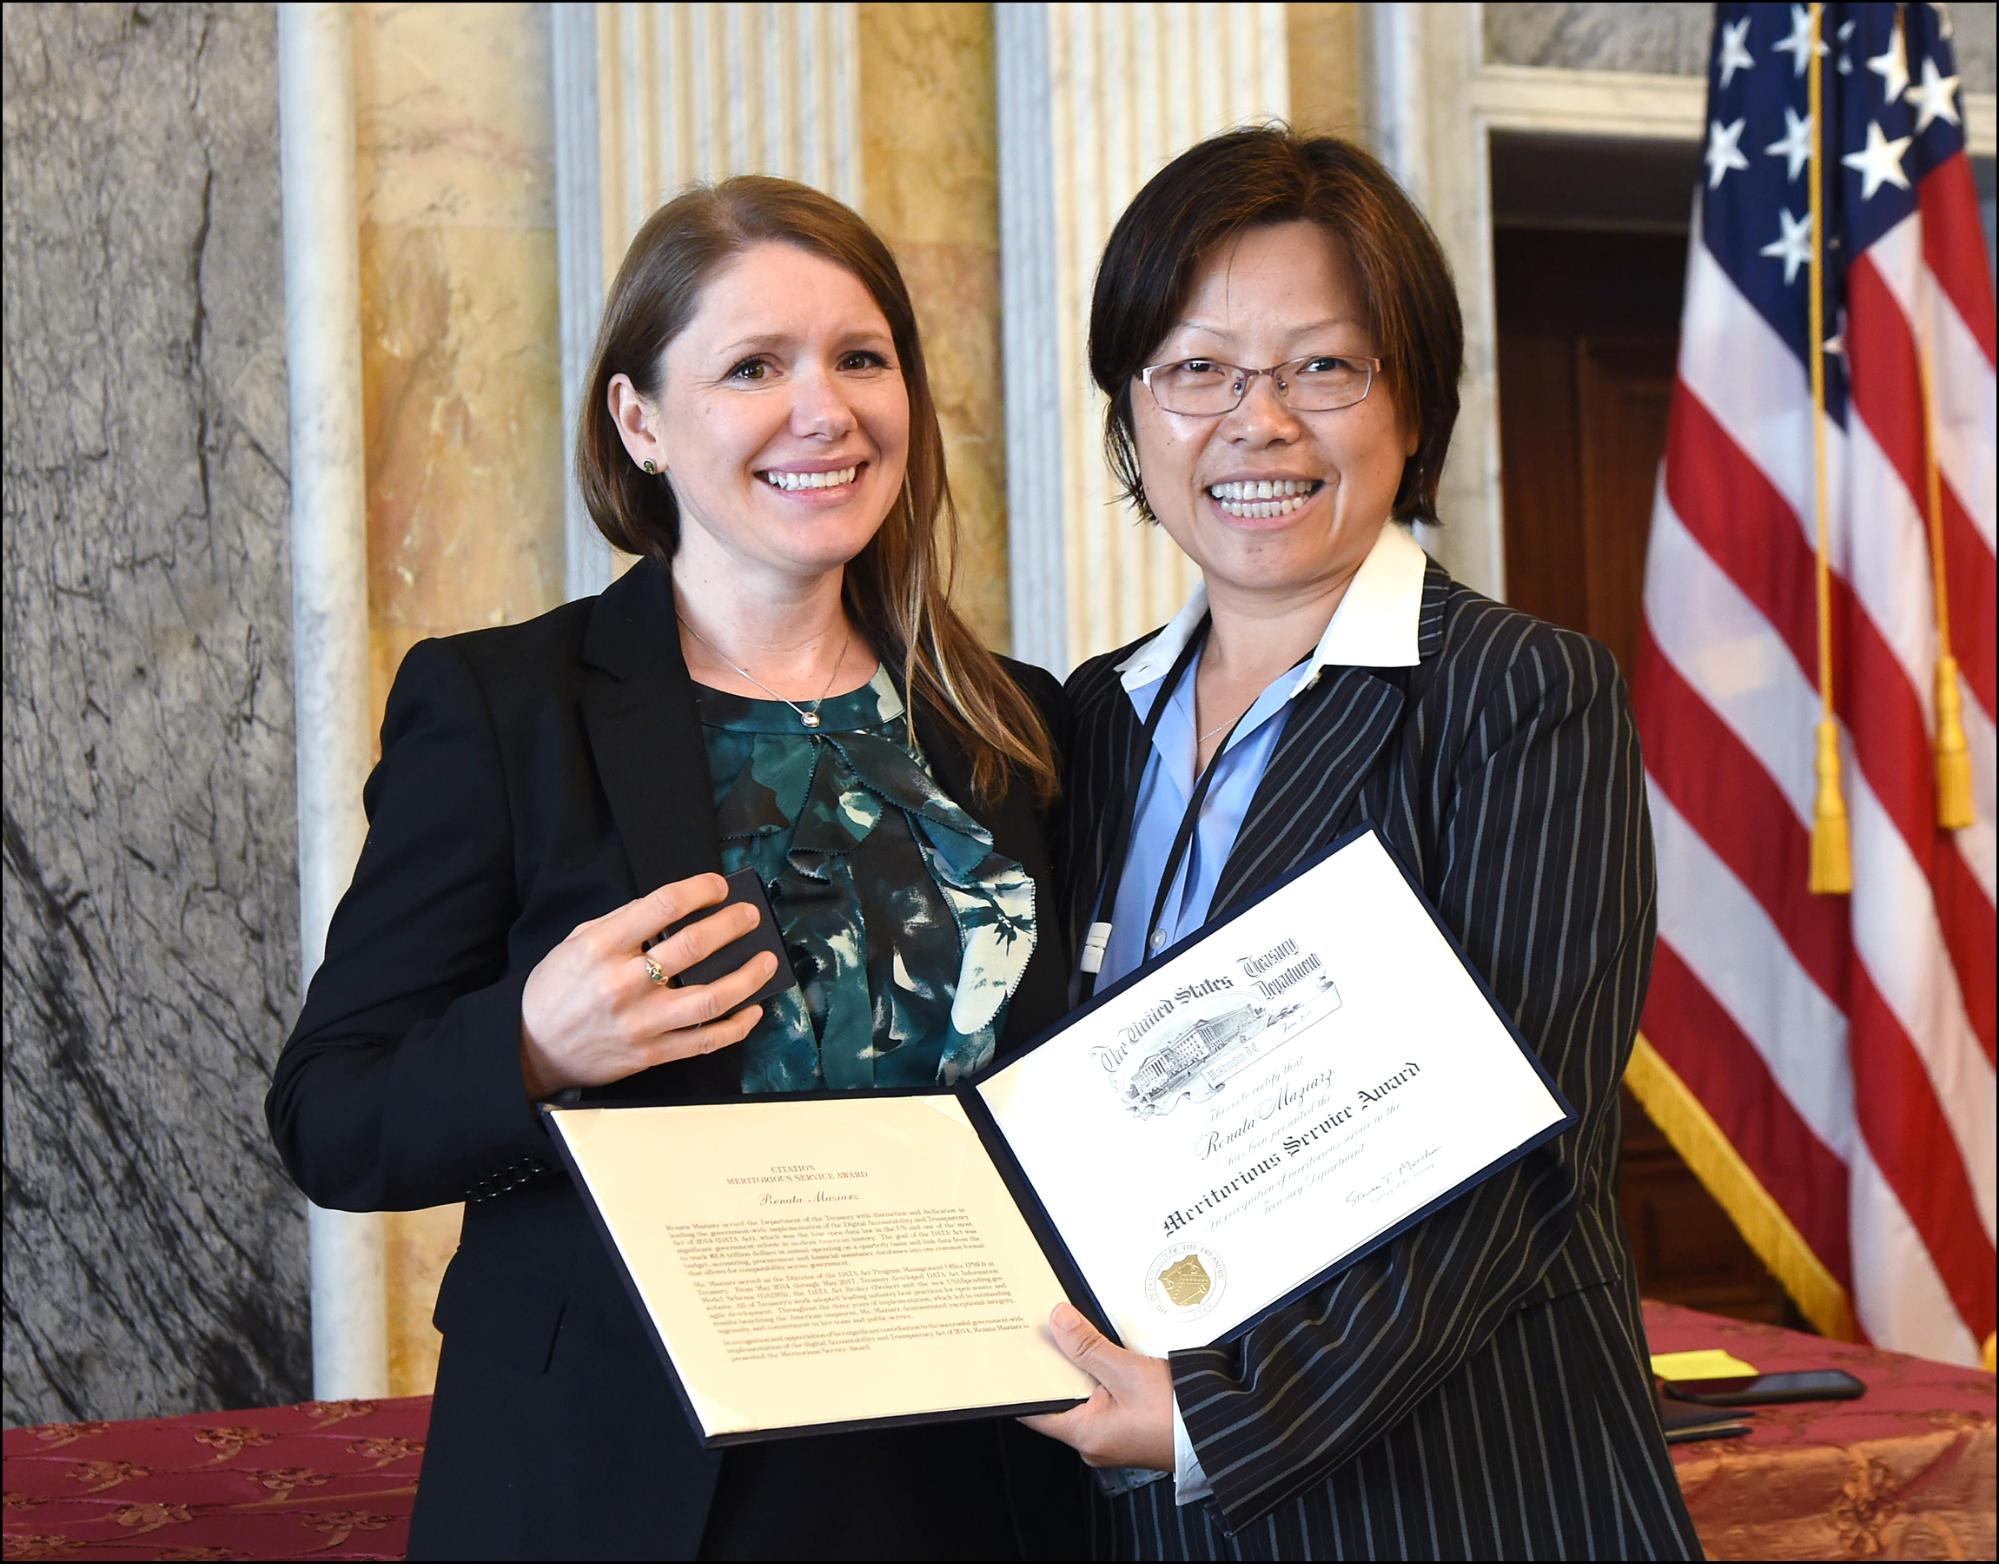 Two women smiling, standing side by side. Woman on the right is holding a certificate.